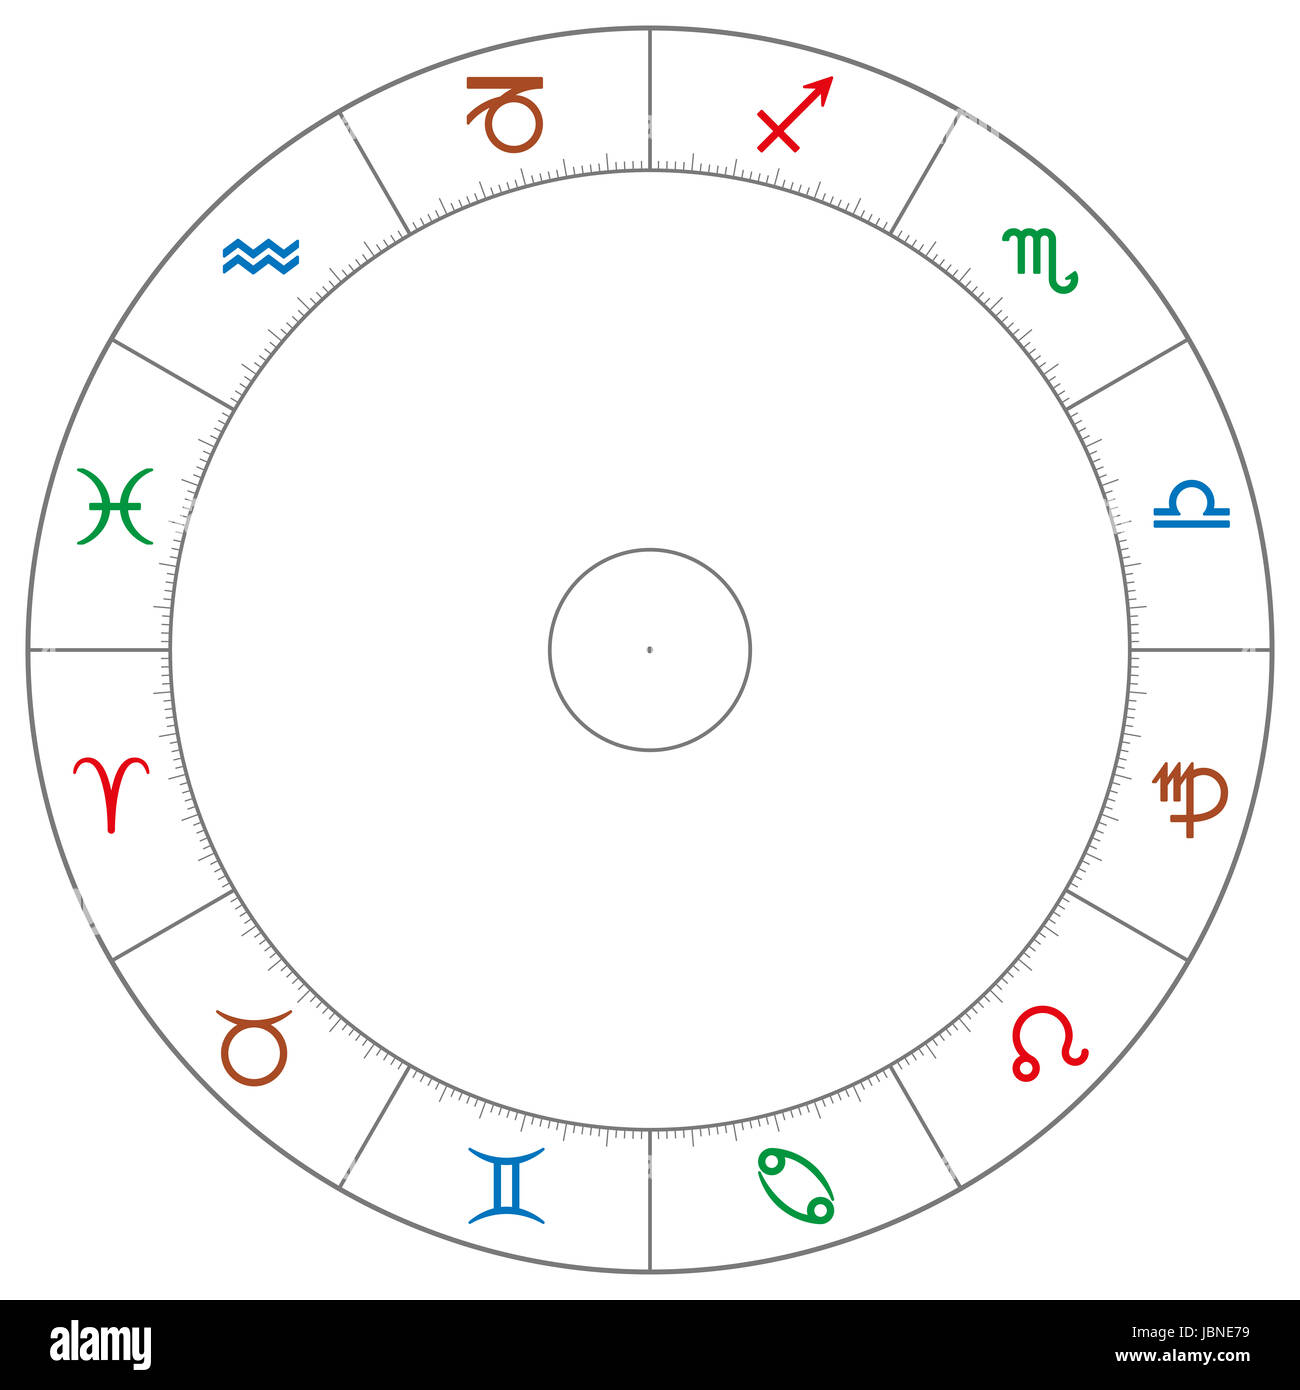 Wheel of the zodiac with astrological signs and symbols in the colors of the four element. Fire red, air blue, water green and earth brown. Stock Photo